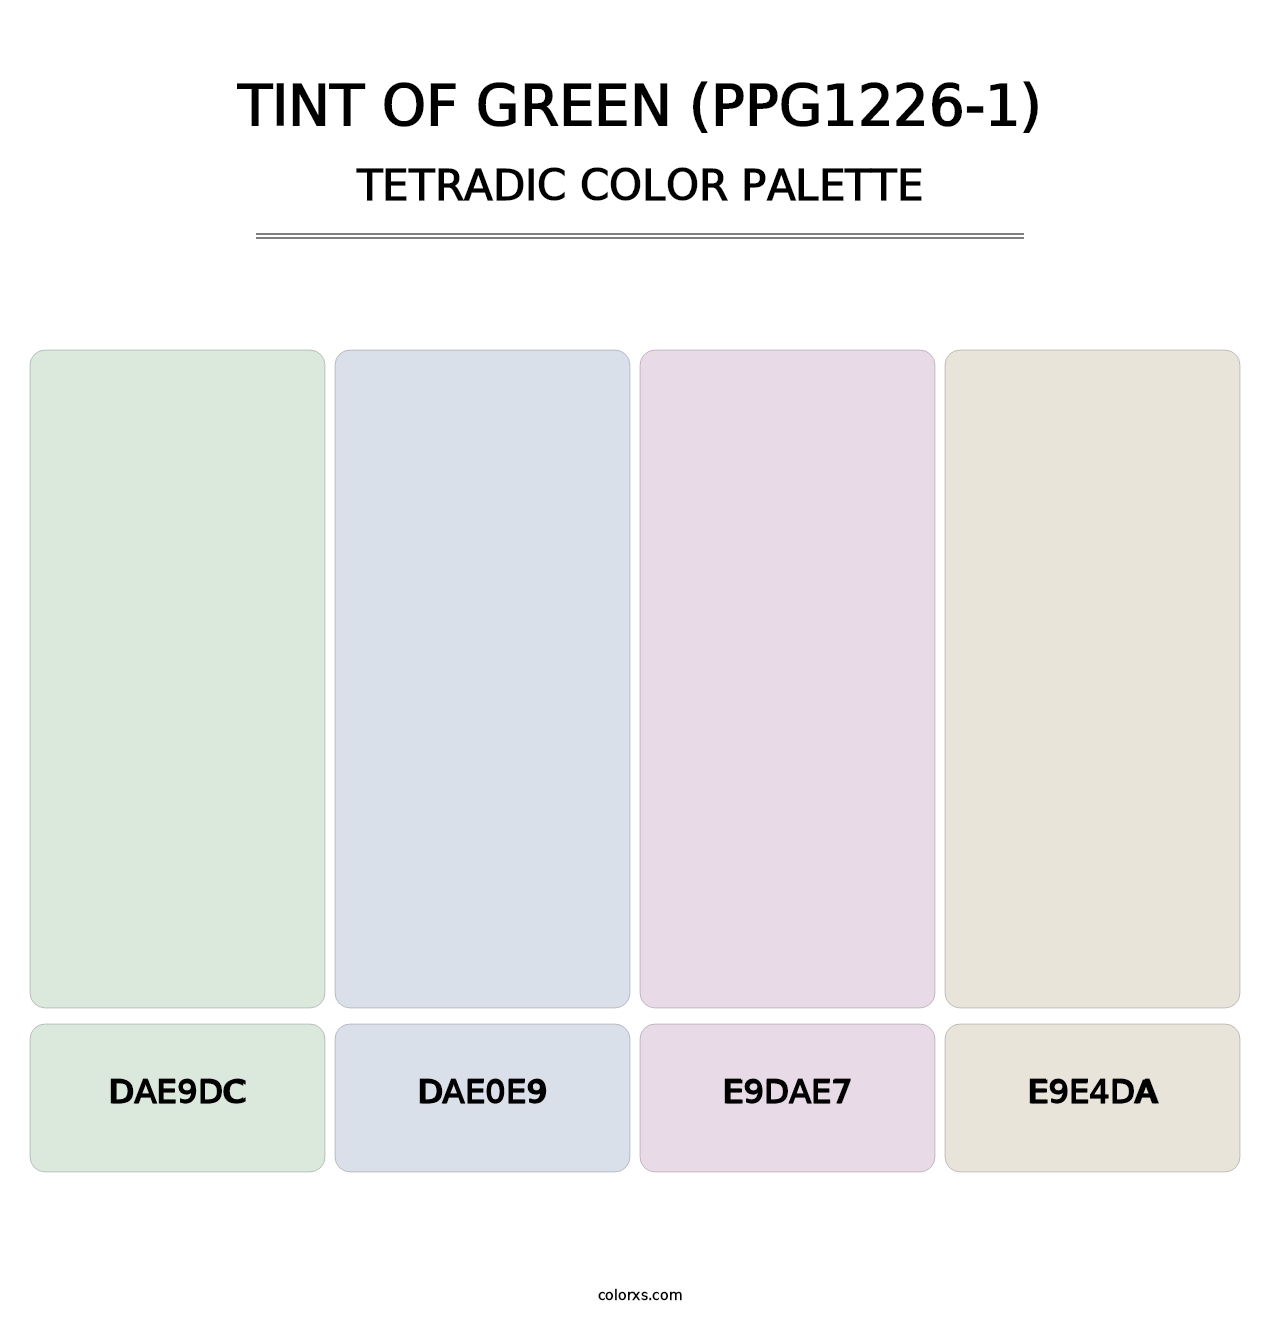 Tint Of Green (PPG1226-1) - Tetradic Color Palette